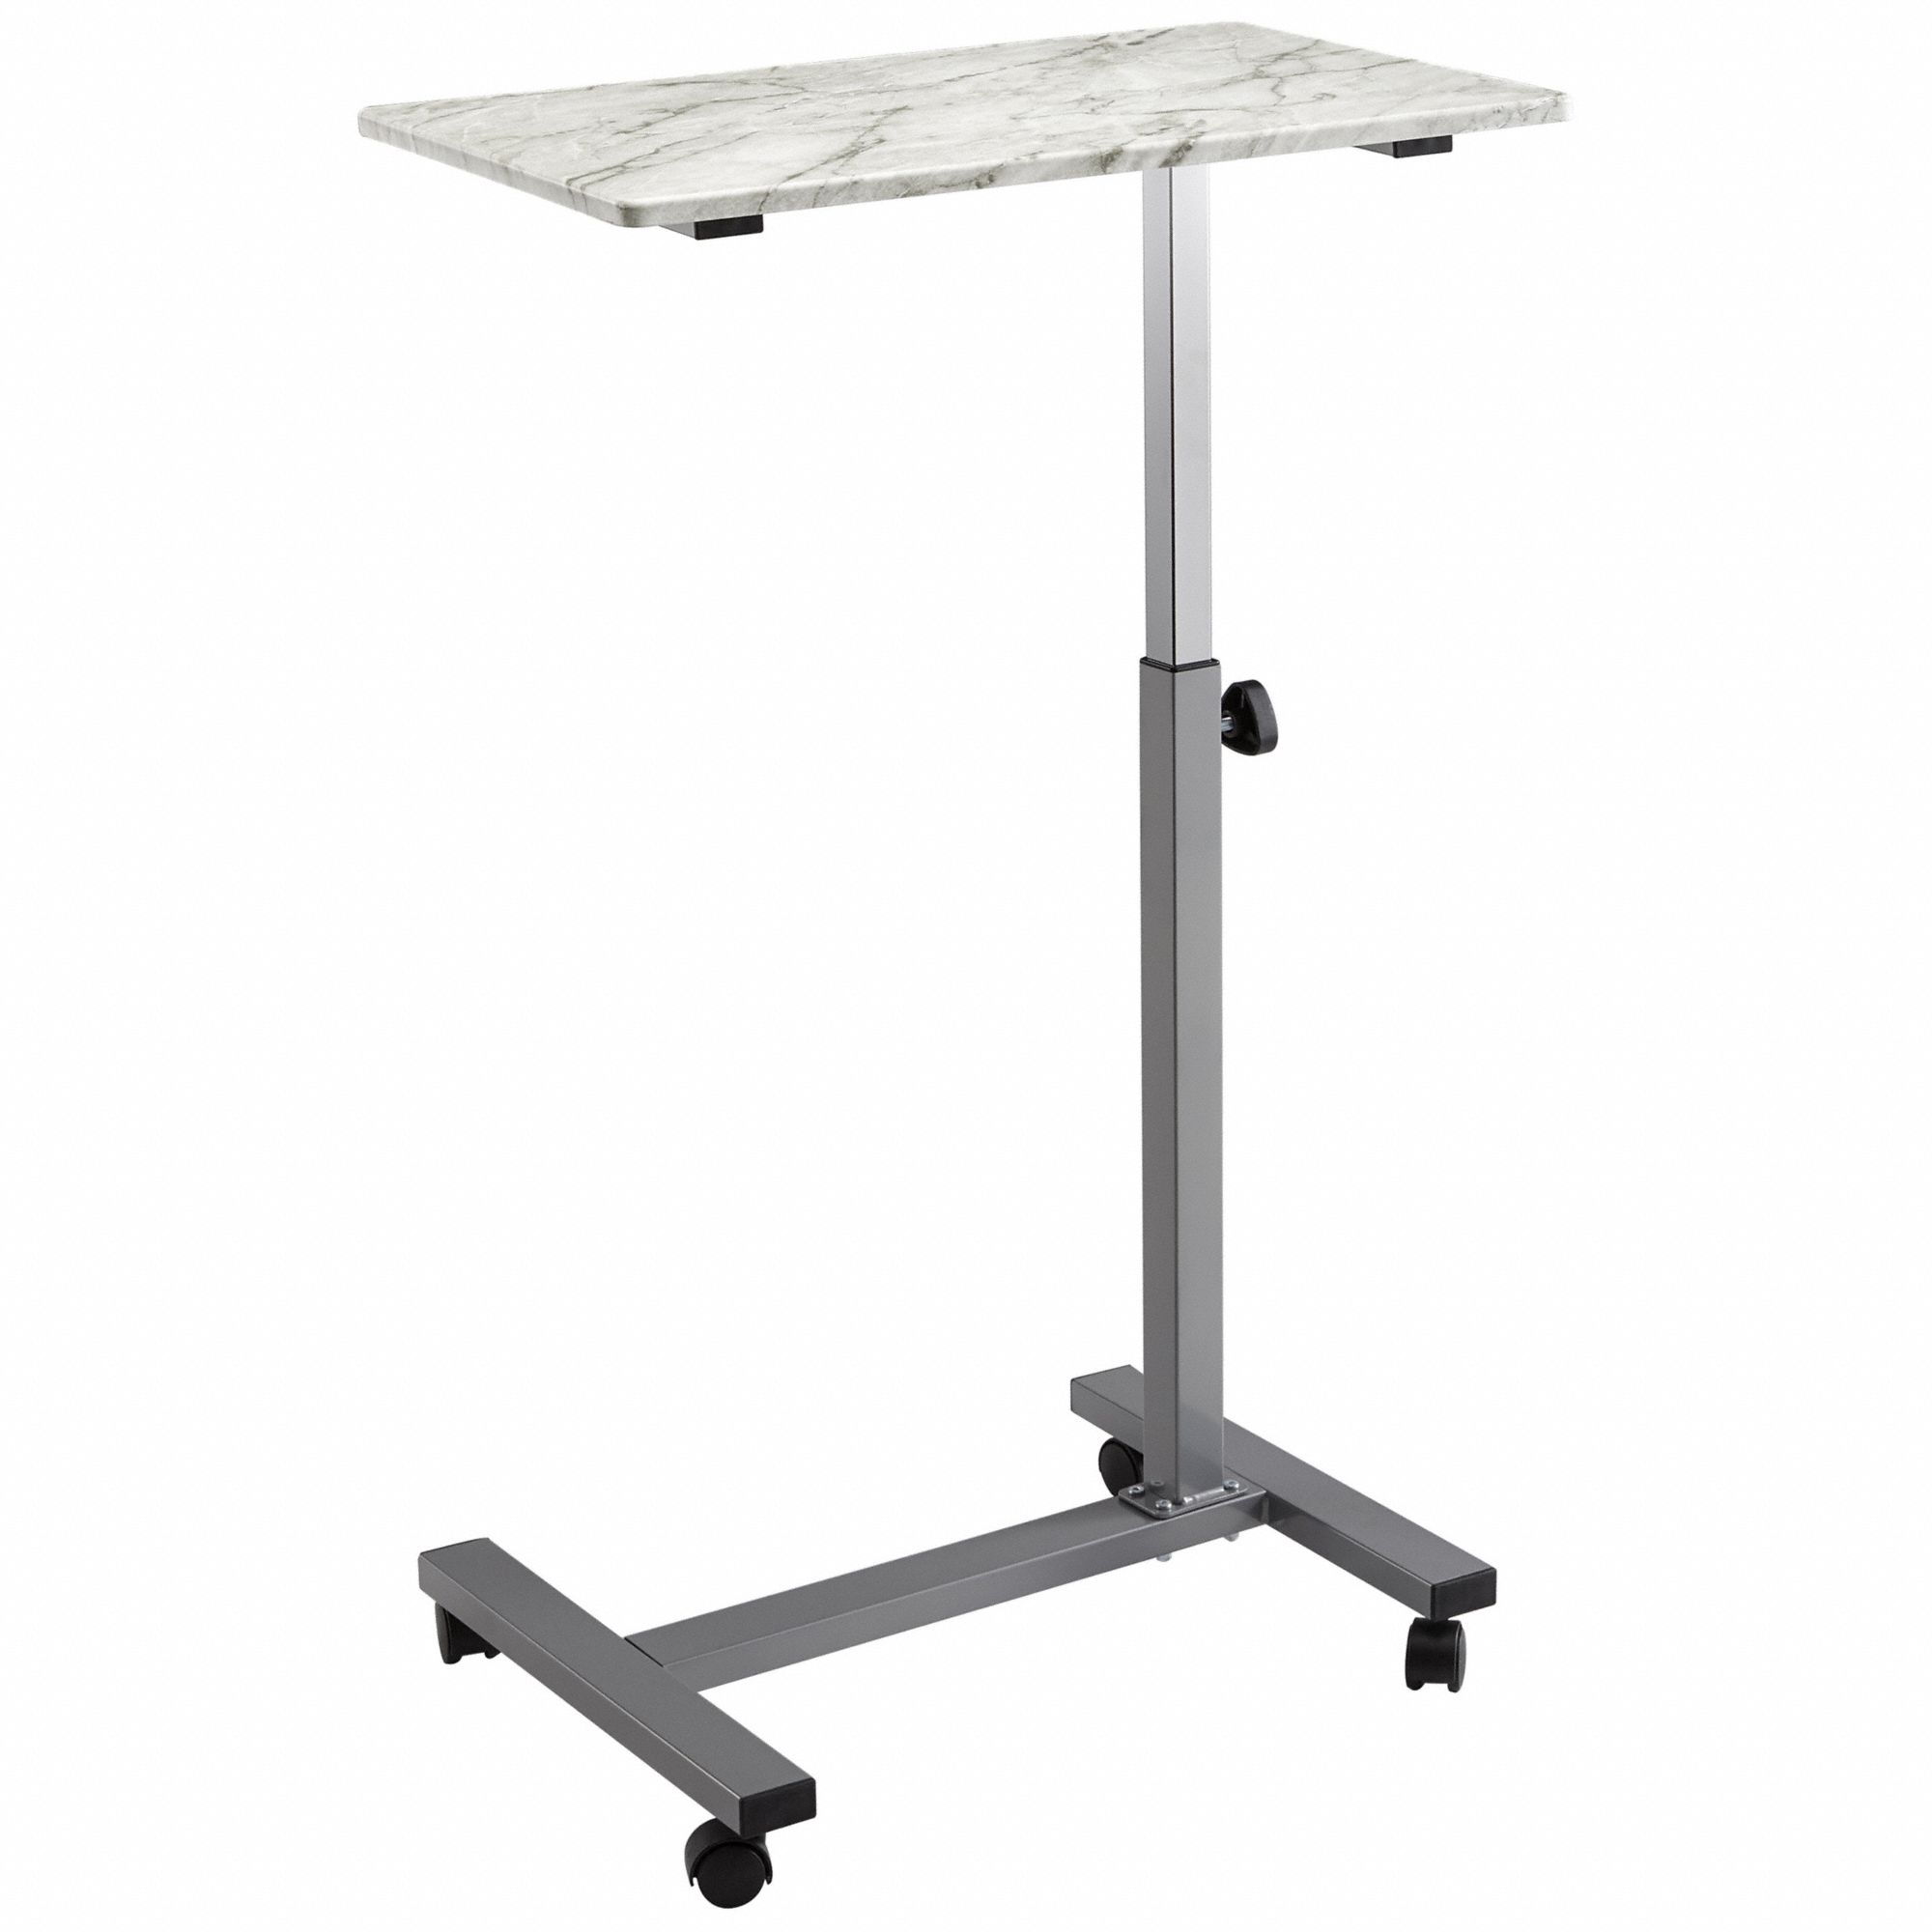 Laptop Cart: 23 5/8 in Overall Wd, 27.55 in to 43.31 in, 15 3/4 in Overall Dp, Grey/White Top